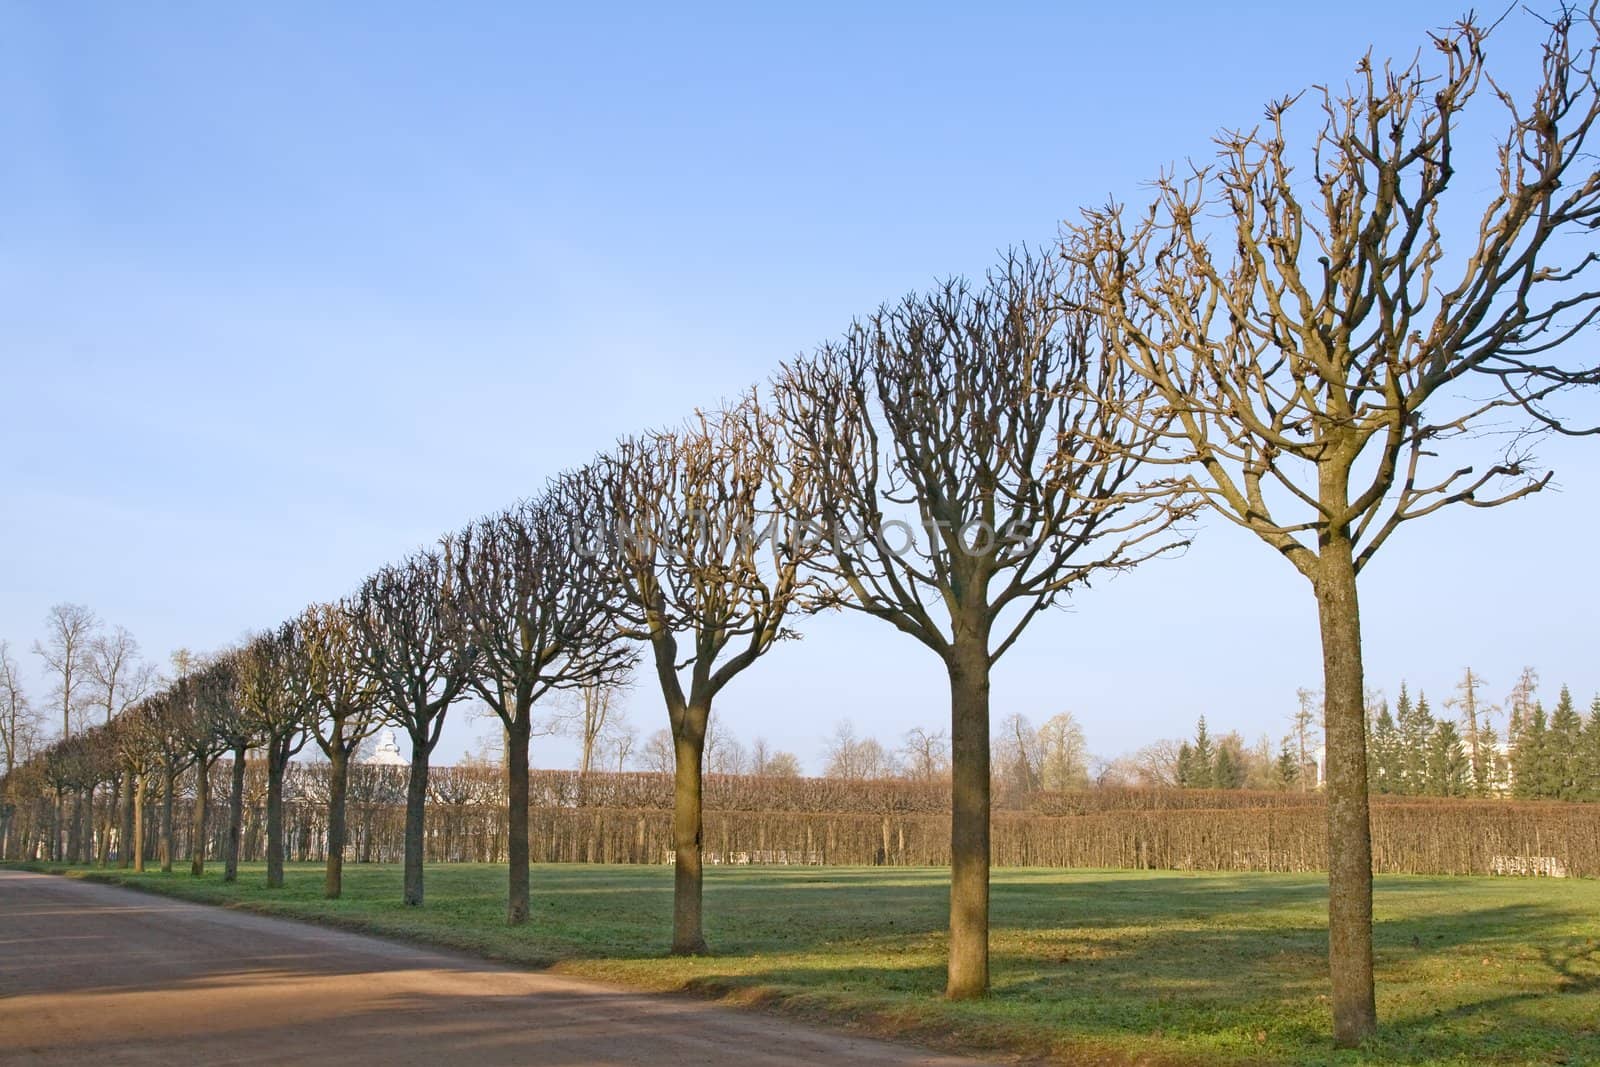 A line of bare trimmed trees in the park